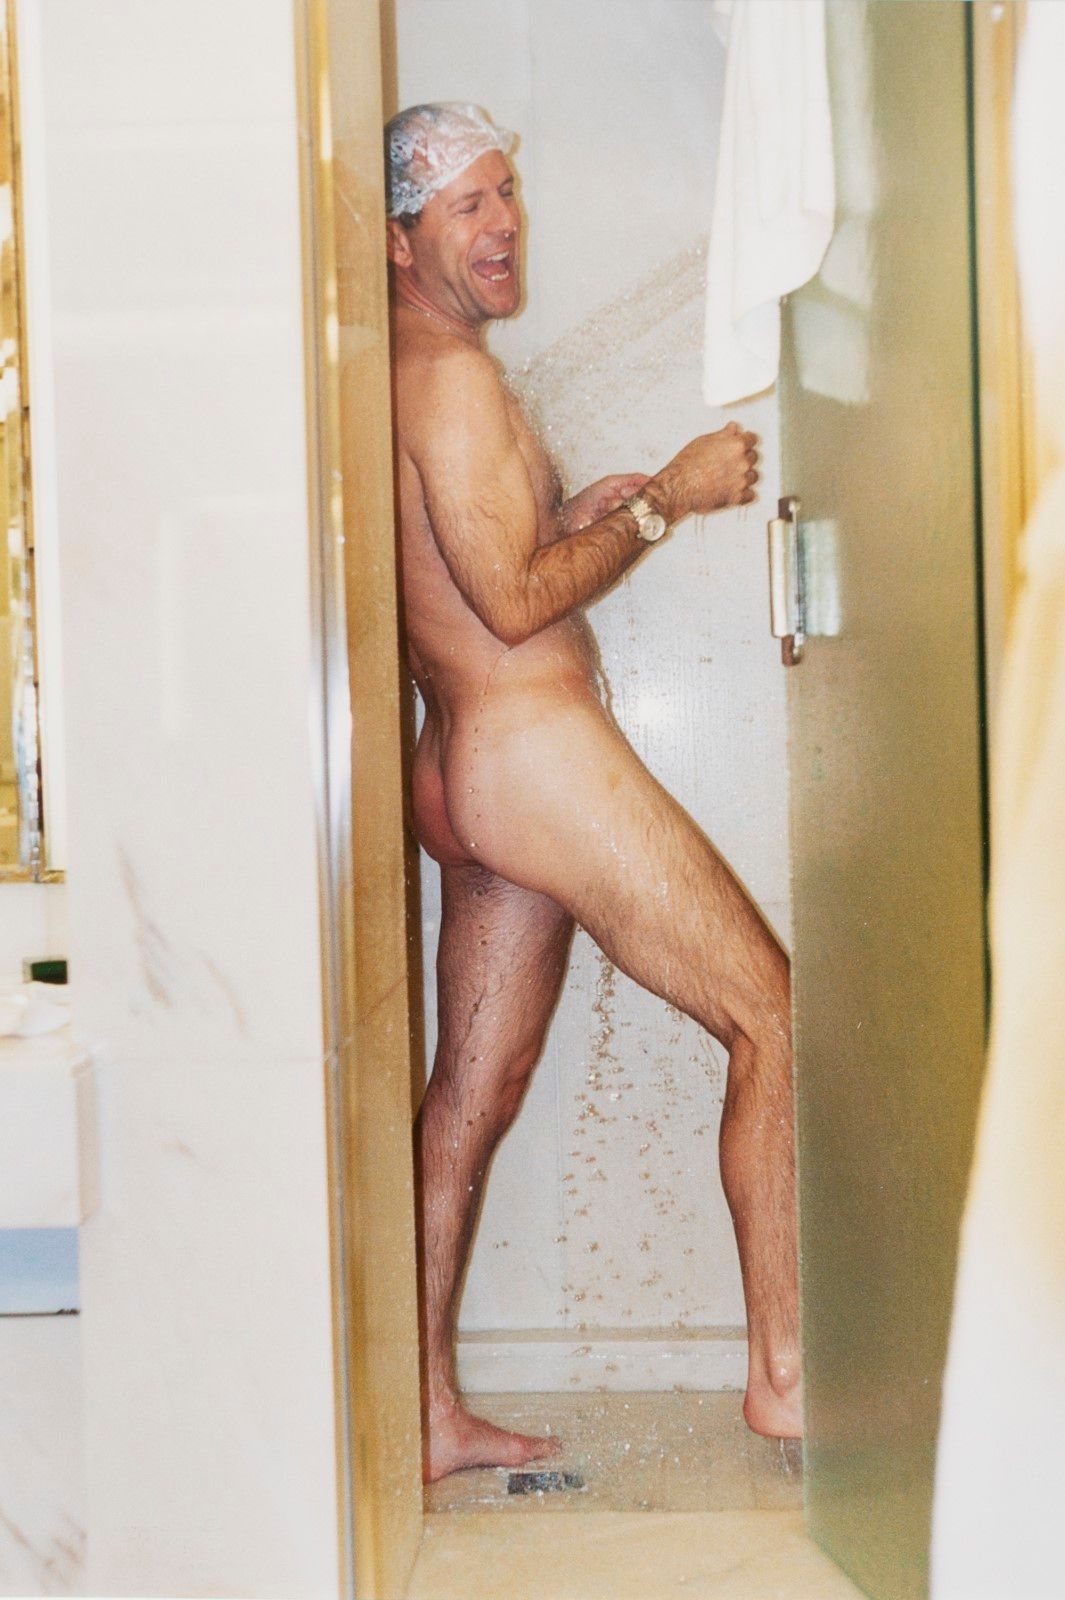 WILLY RIZZO (1928-2013) Willy RIZZO (1928-2013)

Bruce Willis in the shower

Sil&hellip;